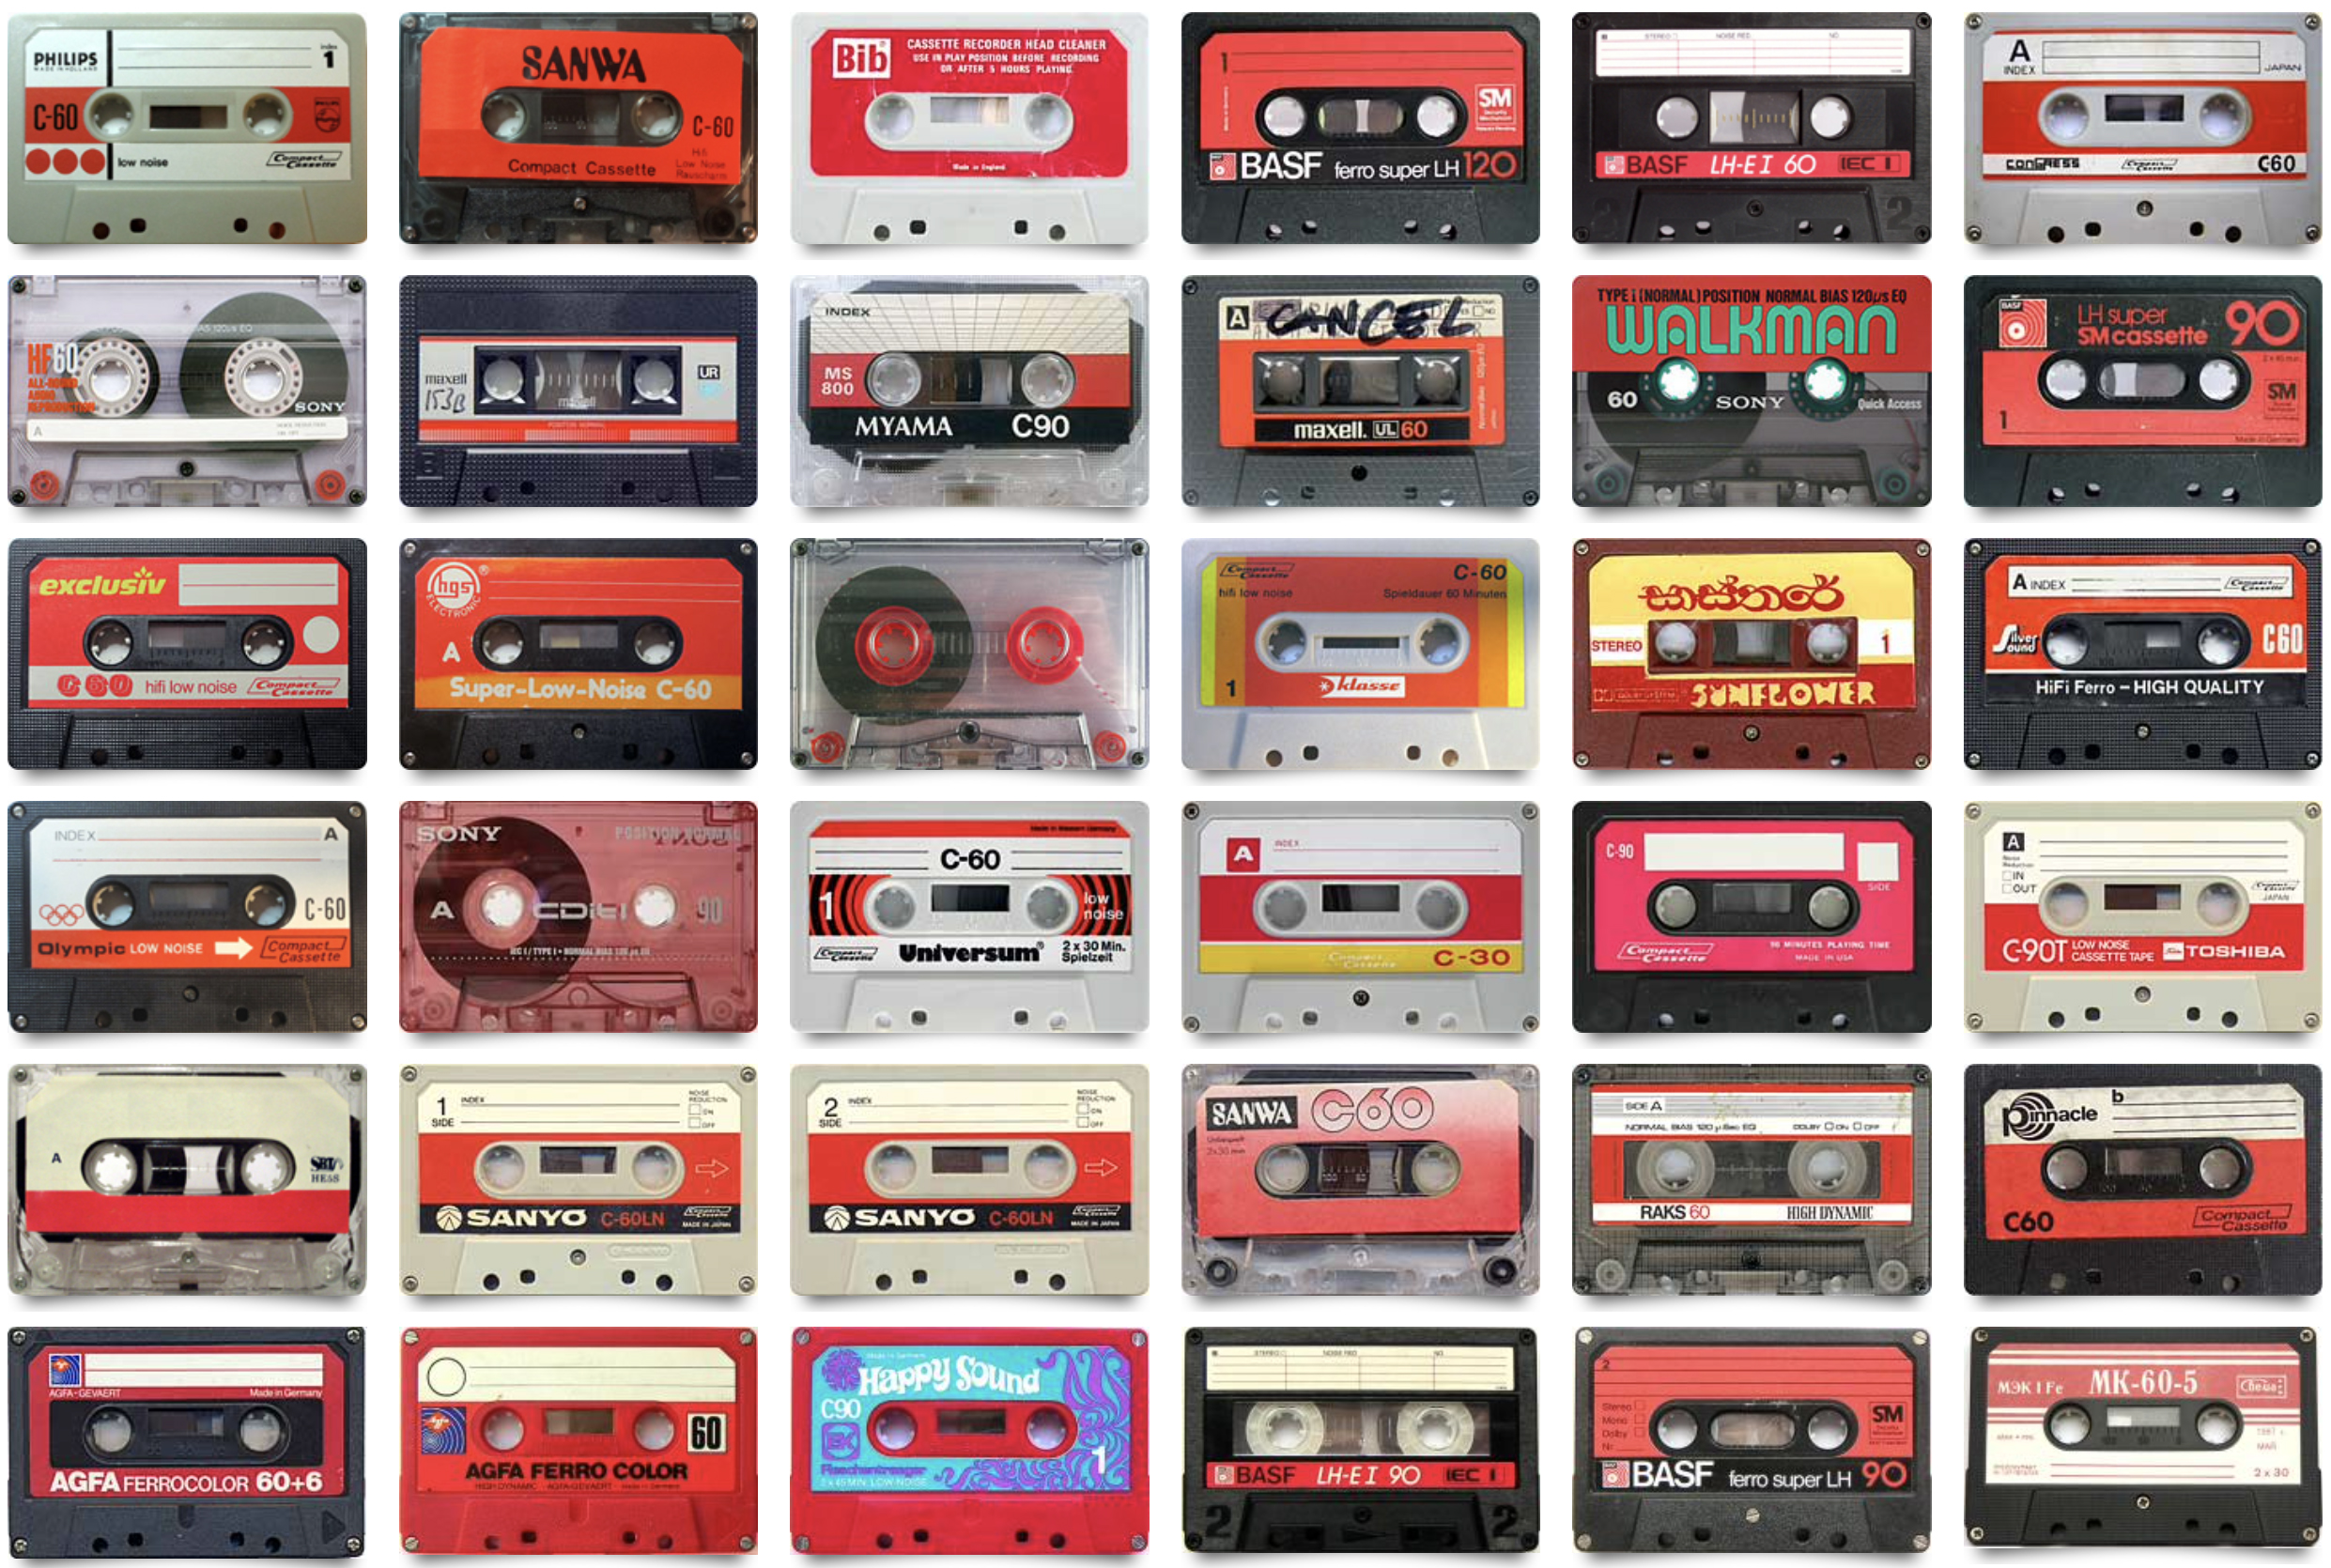 A collection of plastic tape shells, mostly with red detailing, showcasing a multitude of retro typography.